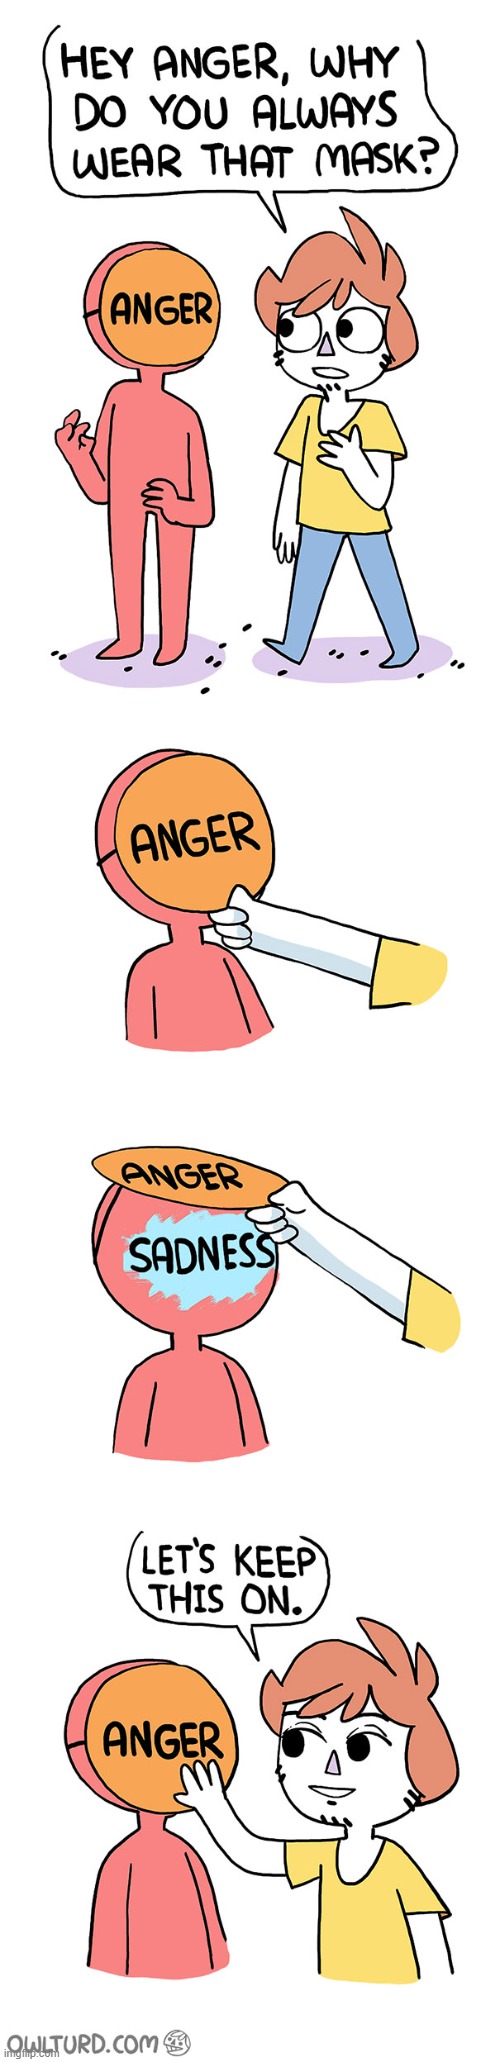 The original Why Do You Always Wear That Mask comic by OwlTurd | image tagged in anger,mask,sadness | made w/ Imgflip meme maker